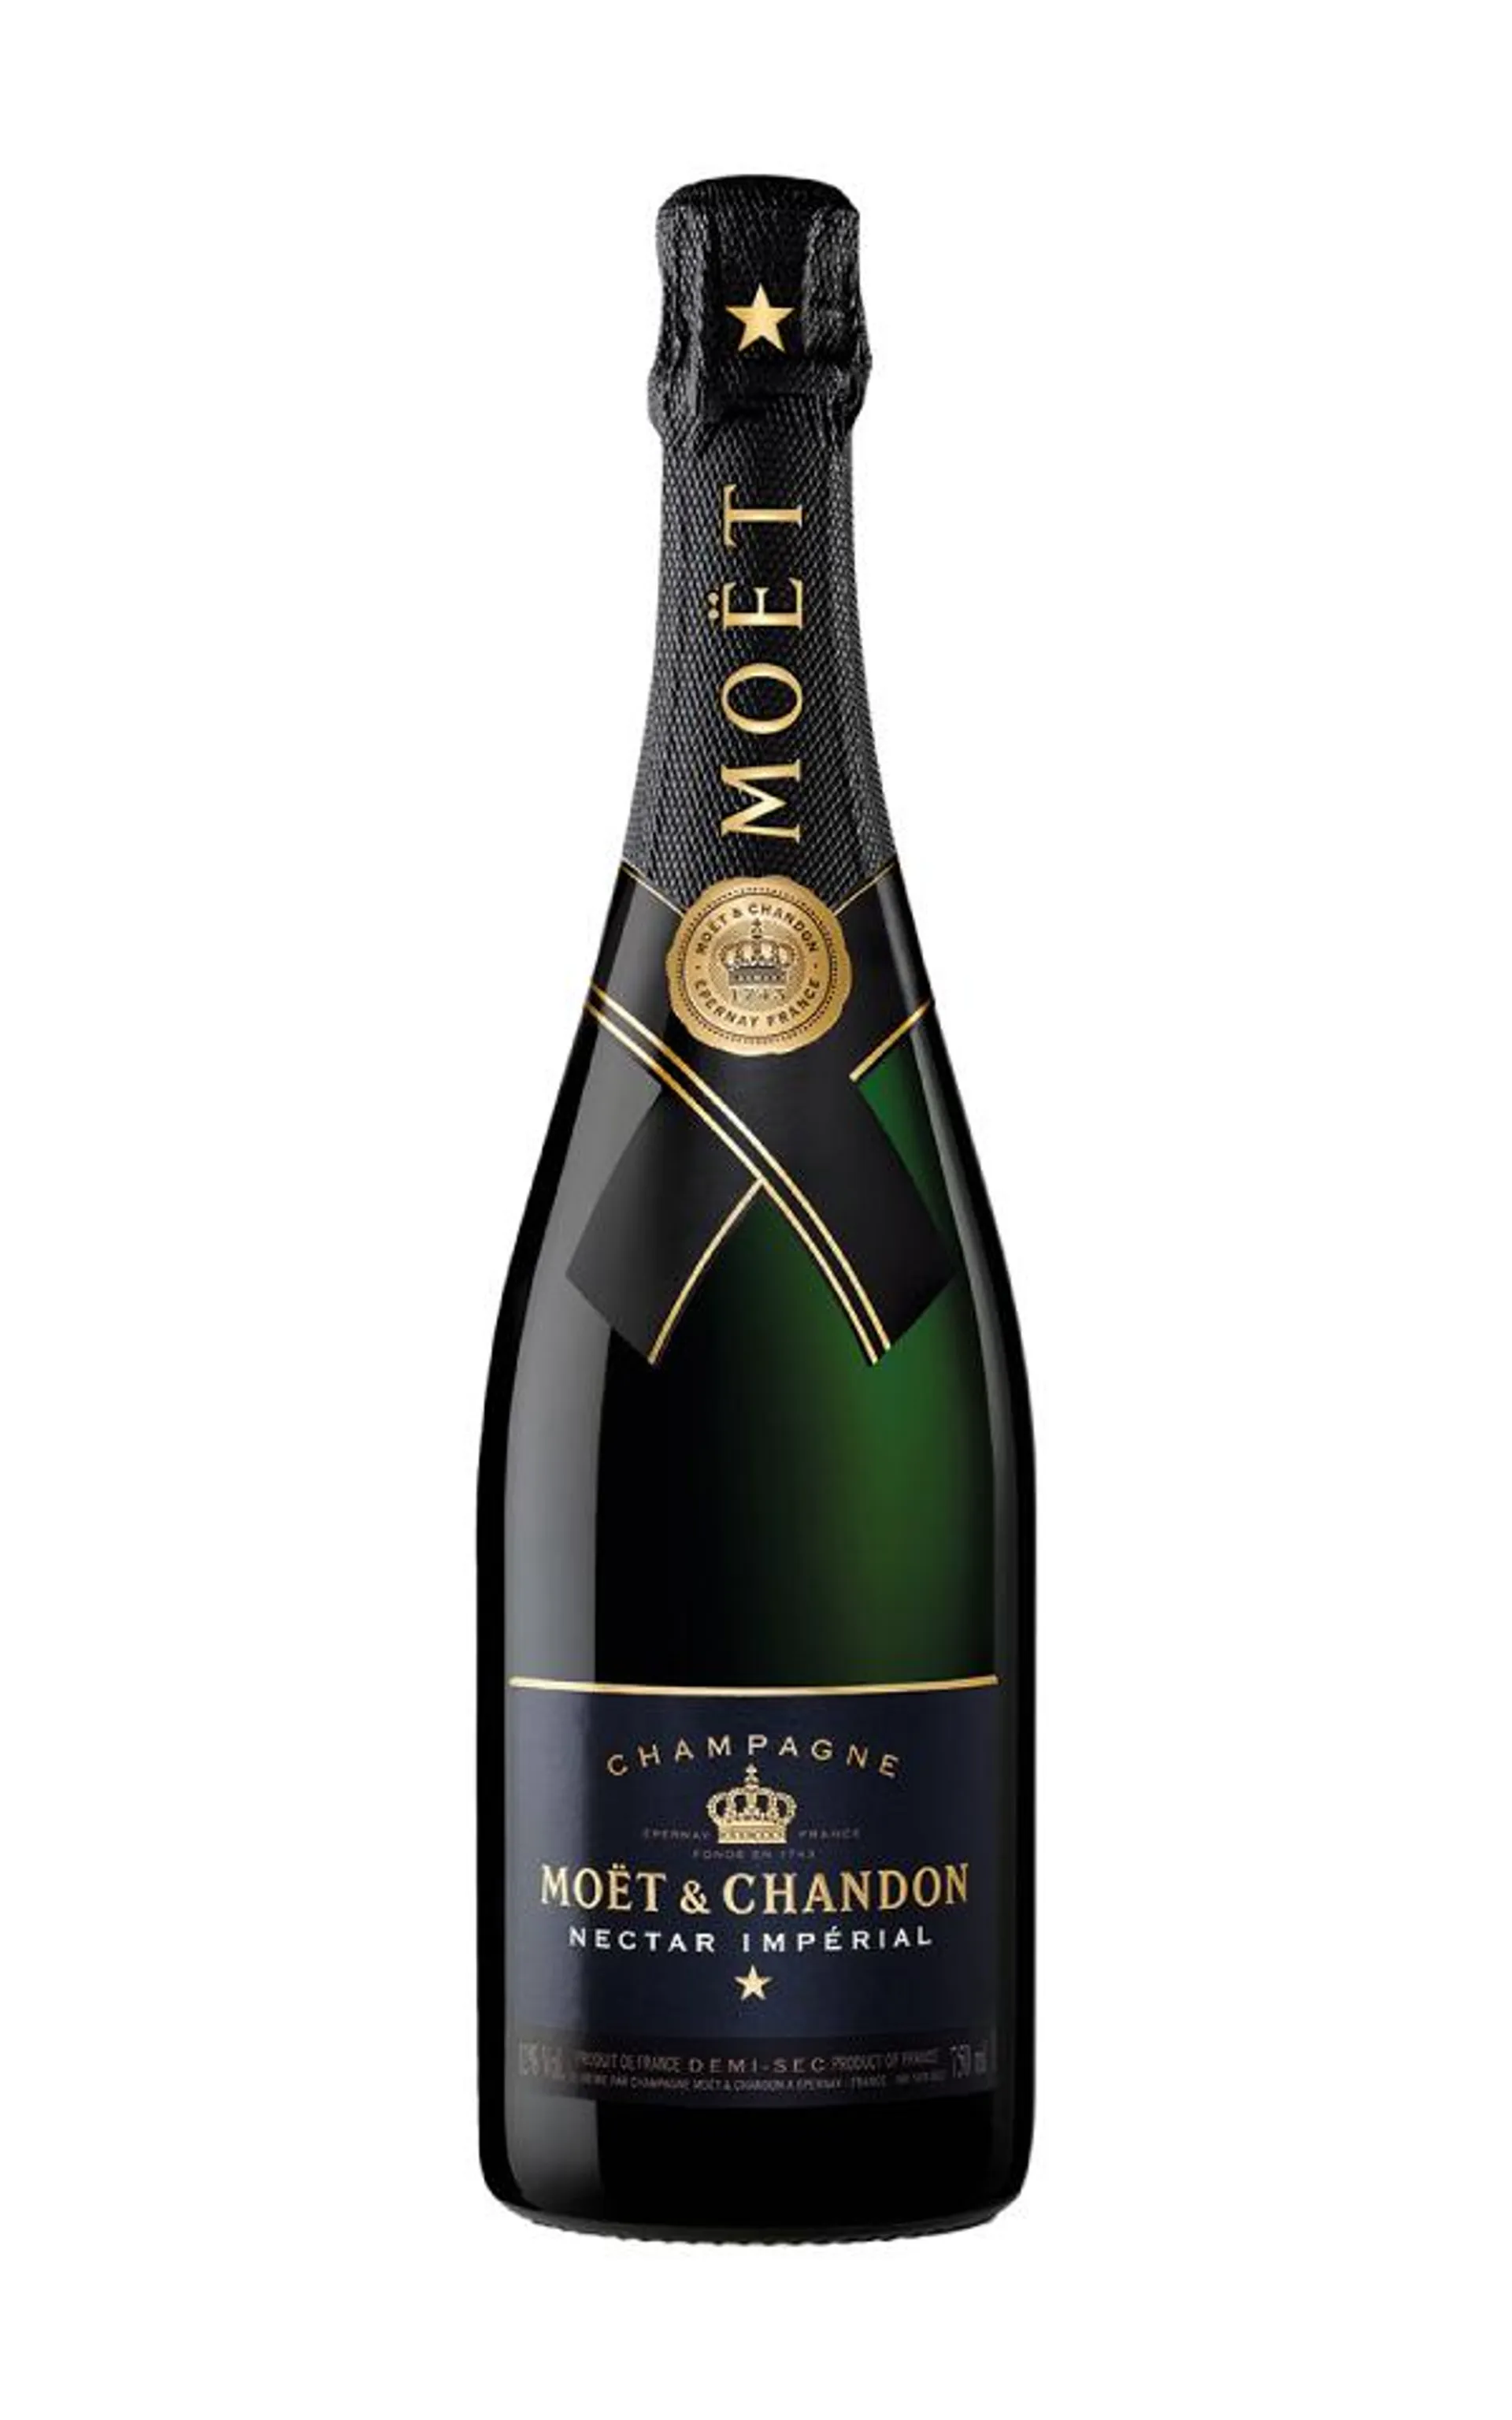 MOET & CHANDON Nectar Imperial